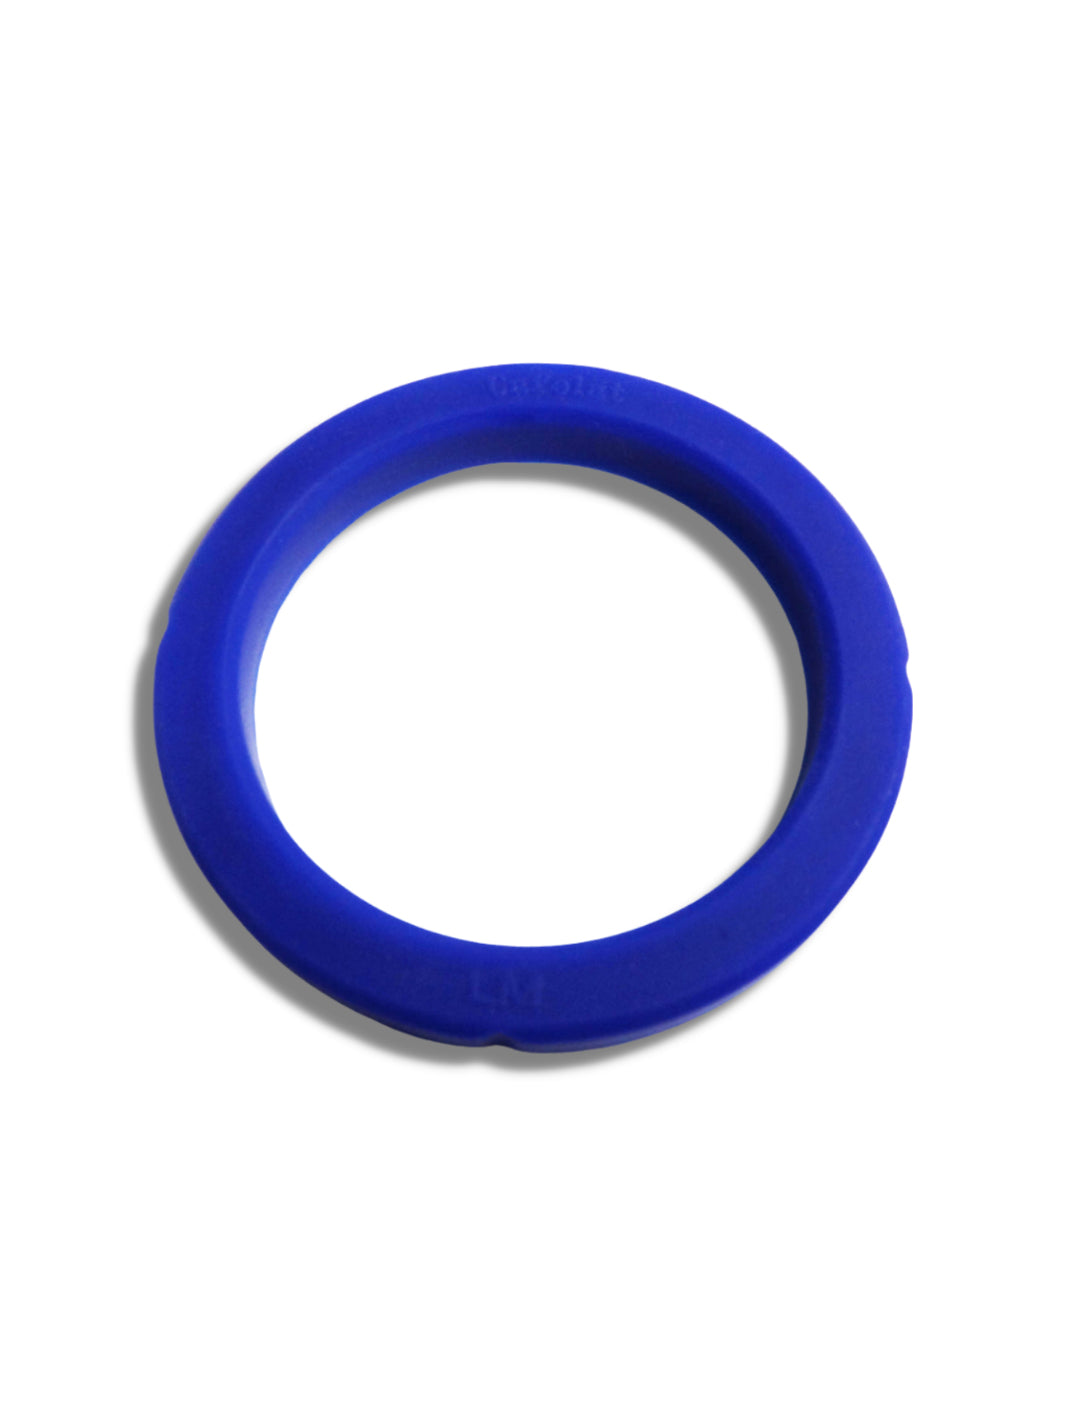 CAFELAT Silicone Group Gasket for La Marzocco